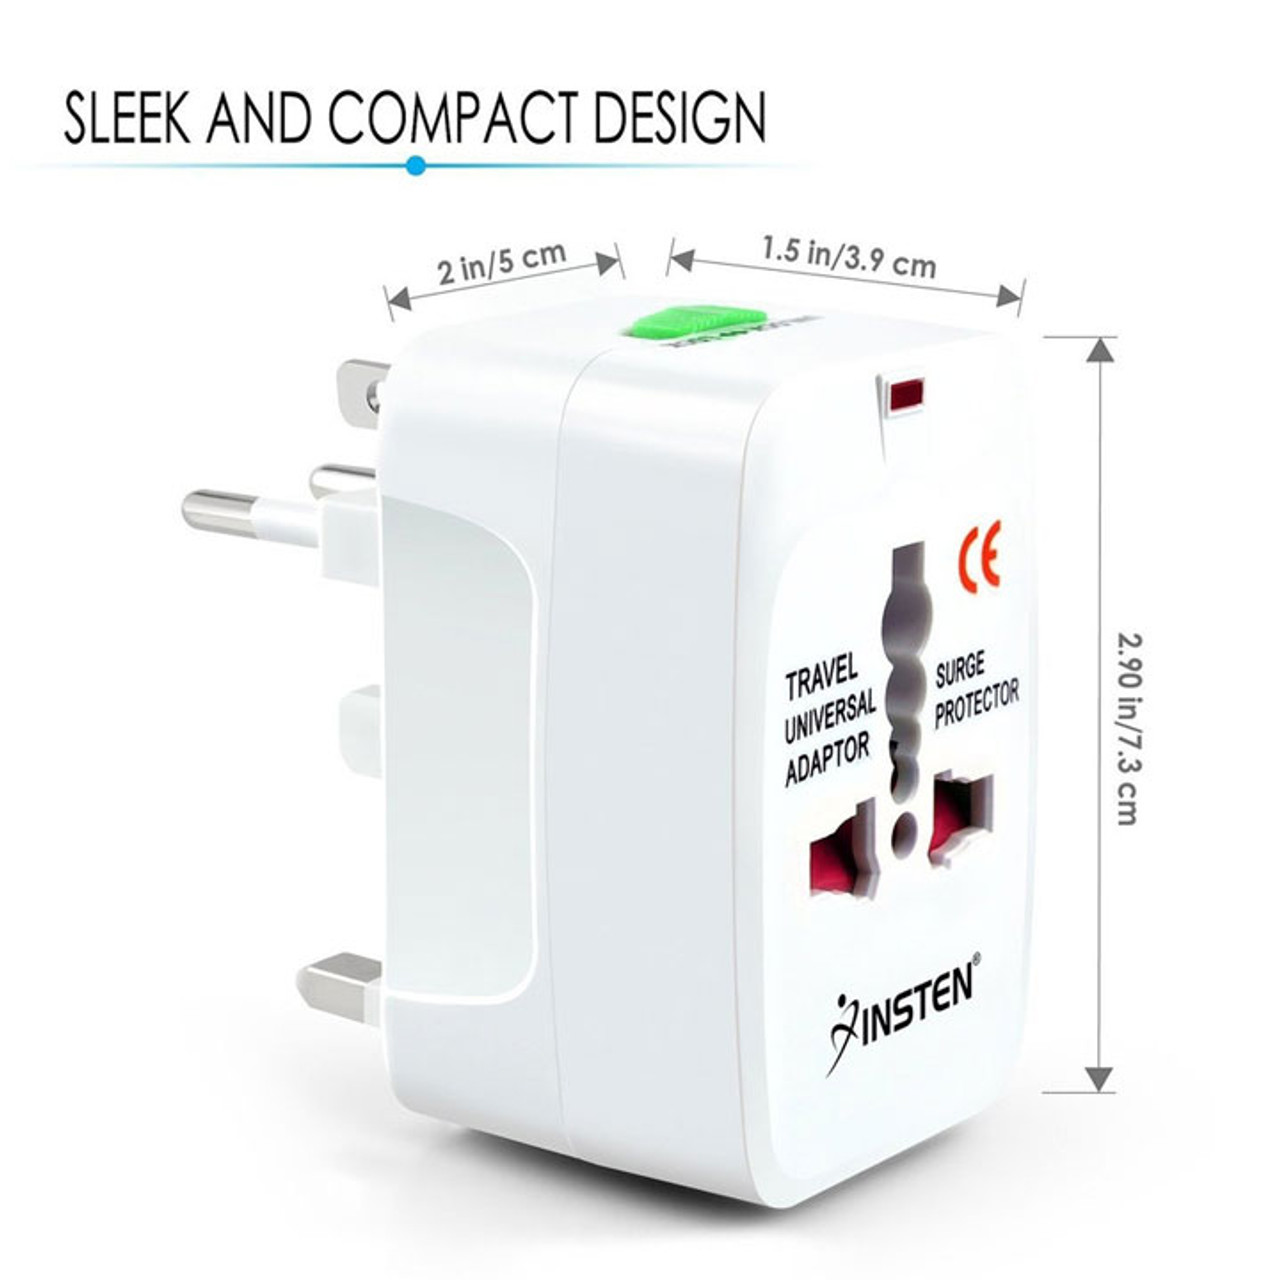 https://cdn11.bigcommerce.com/s-idr2t/images/stencil/1280x1280/products/185/1094/Travel-Power-Adapter-Size__50738.1526564035.jpg?c=2?imbypass=on